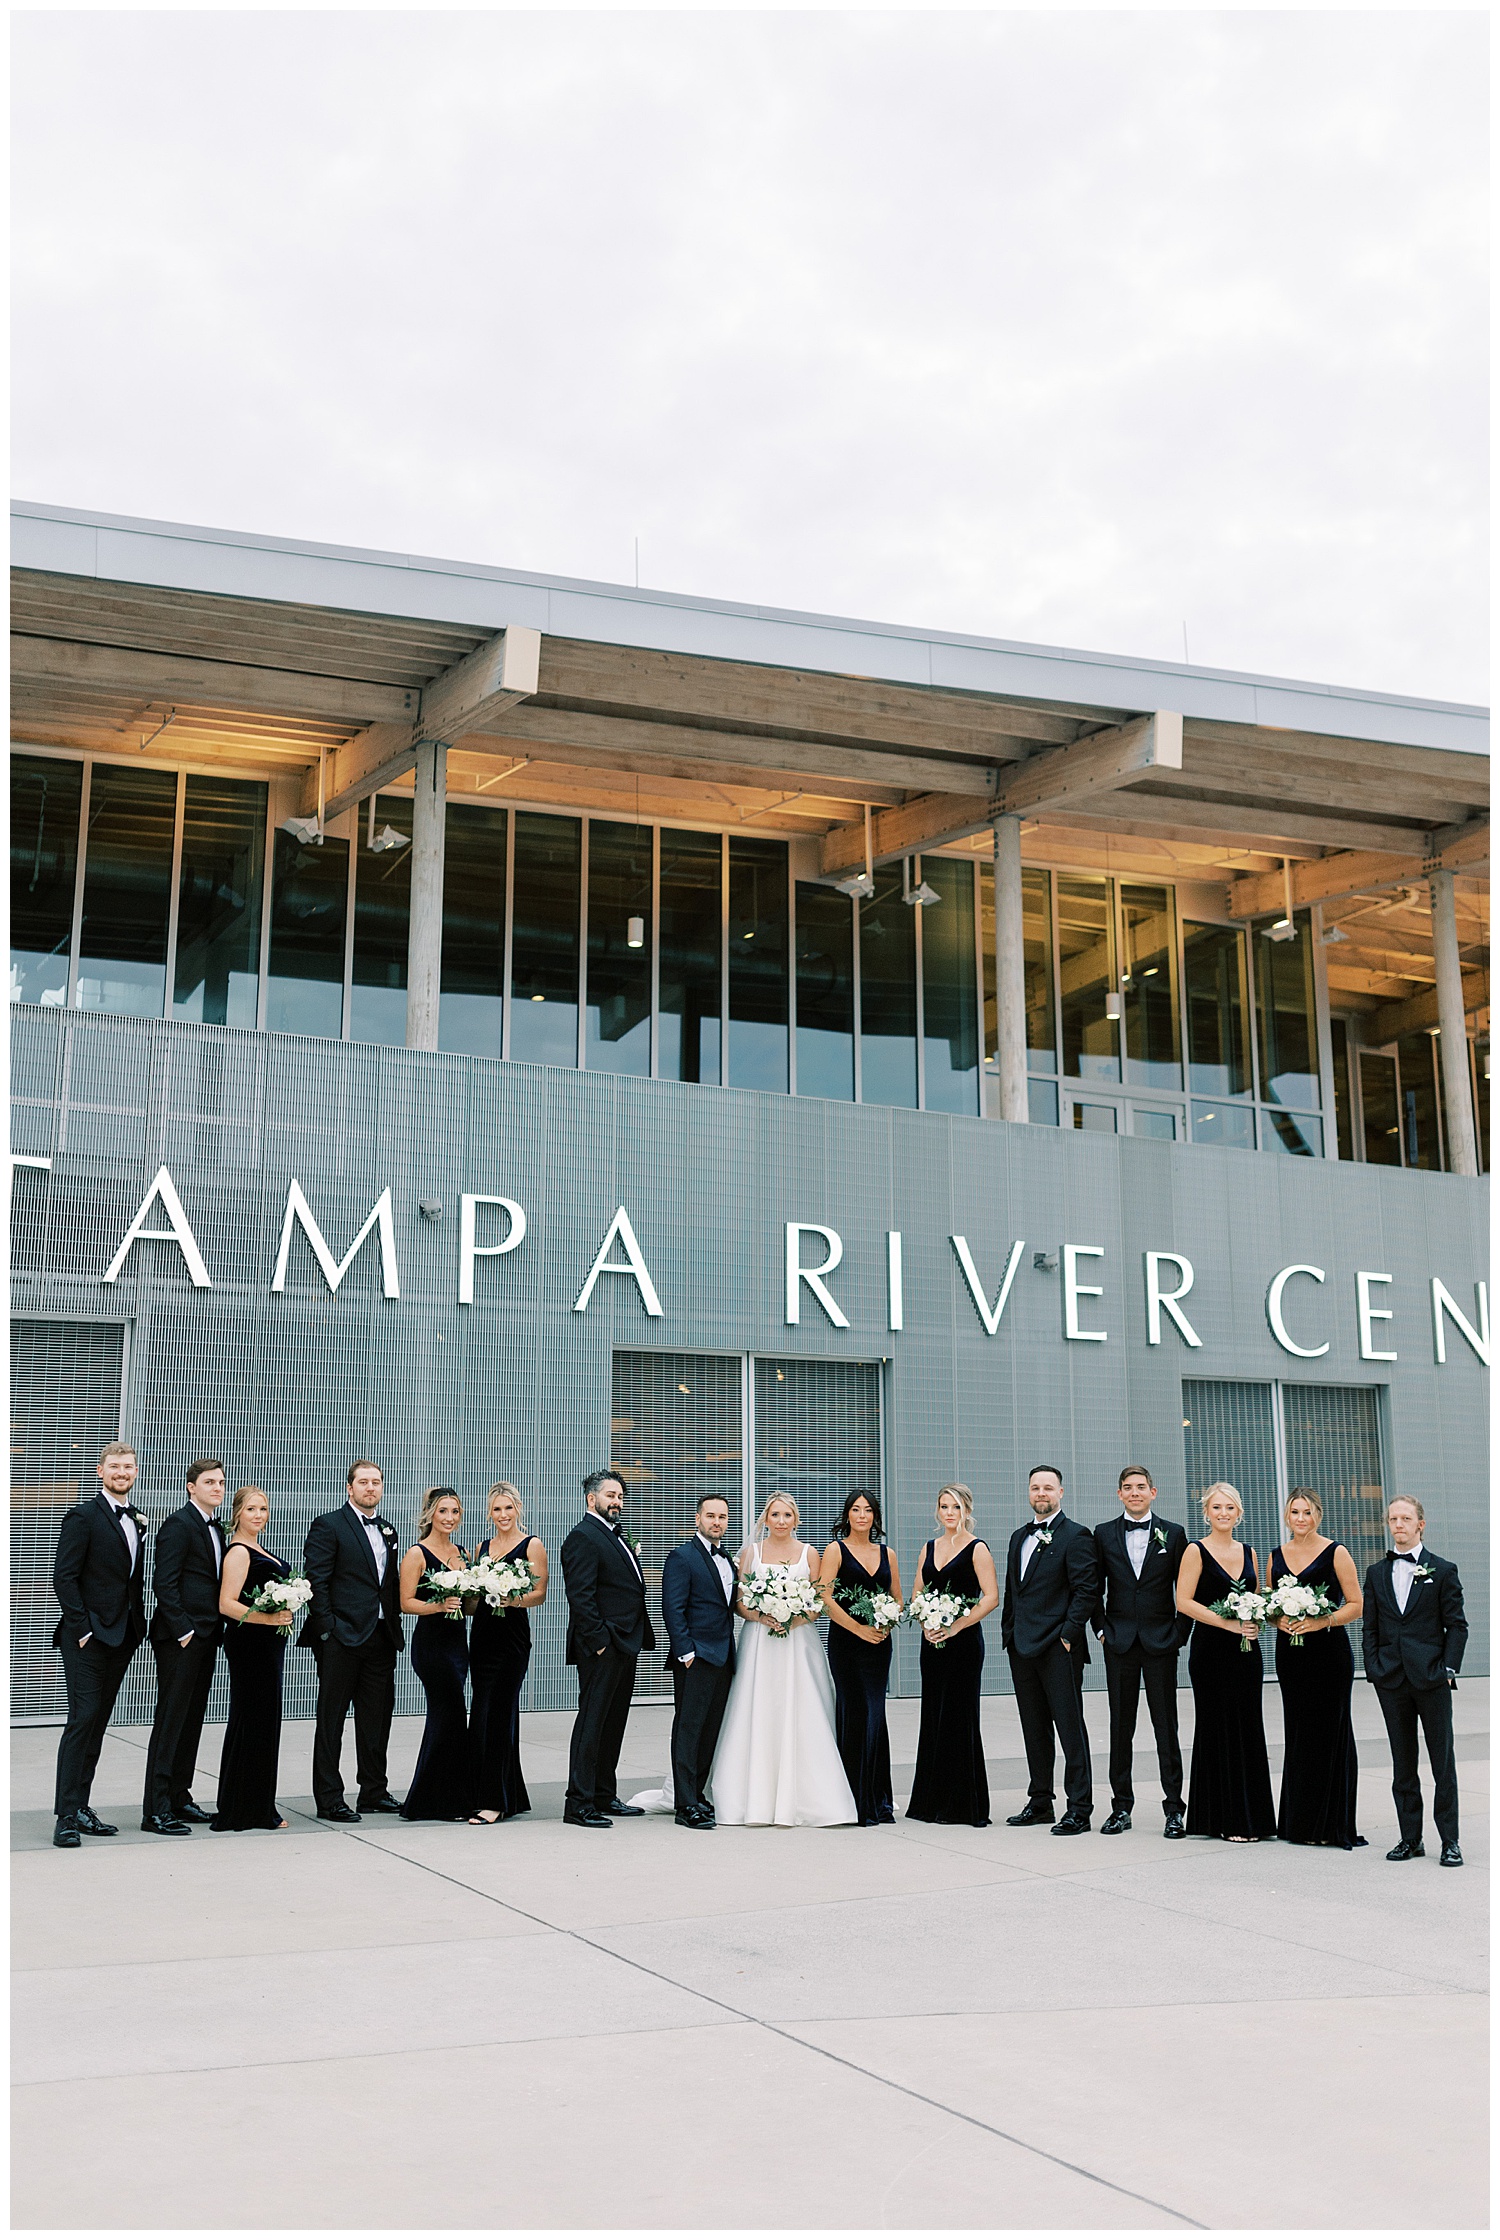 The Tampa River Center wedding with wedding party